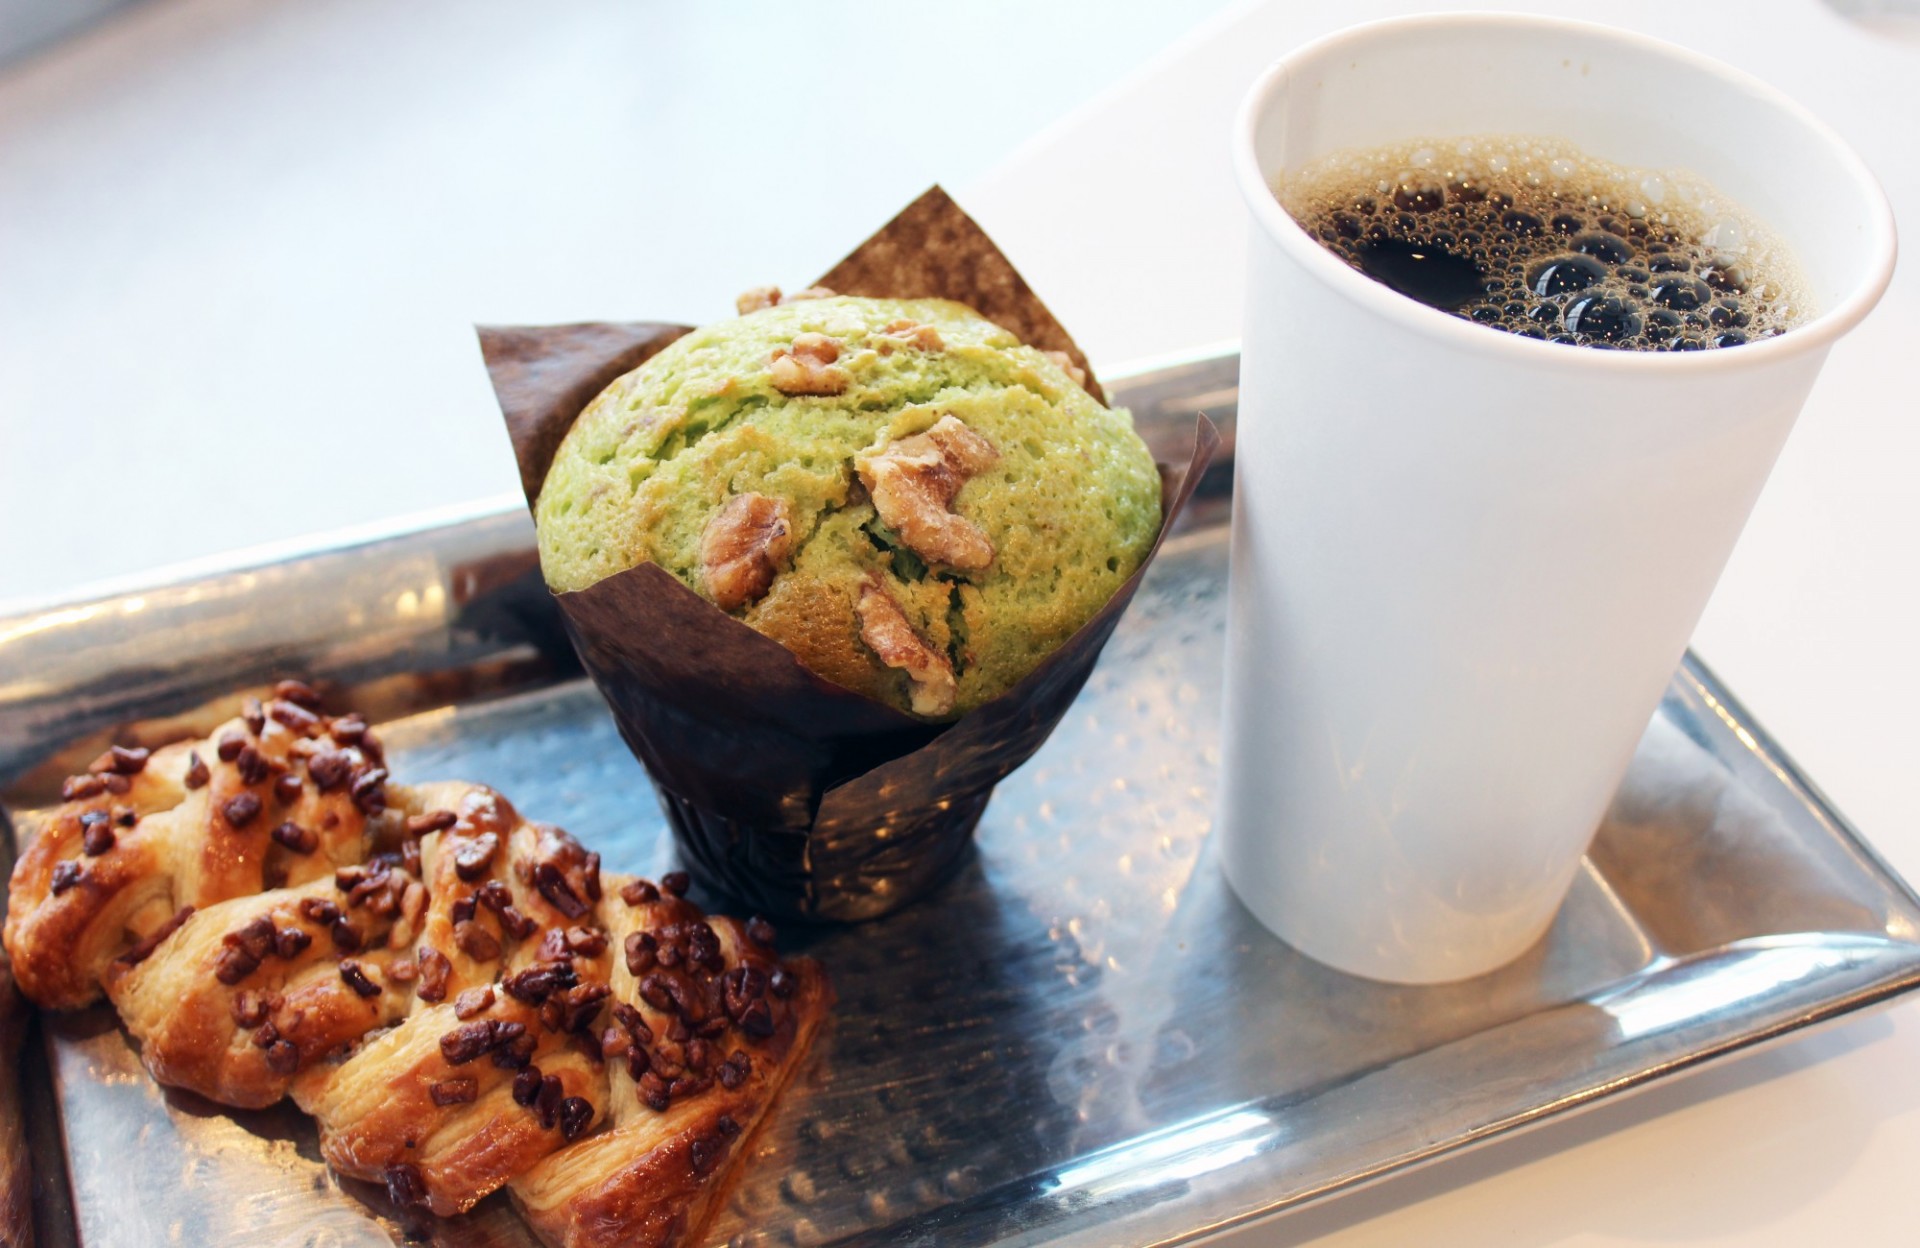 Coffee and pastries from the Café 